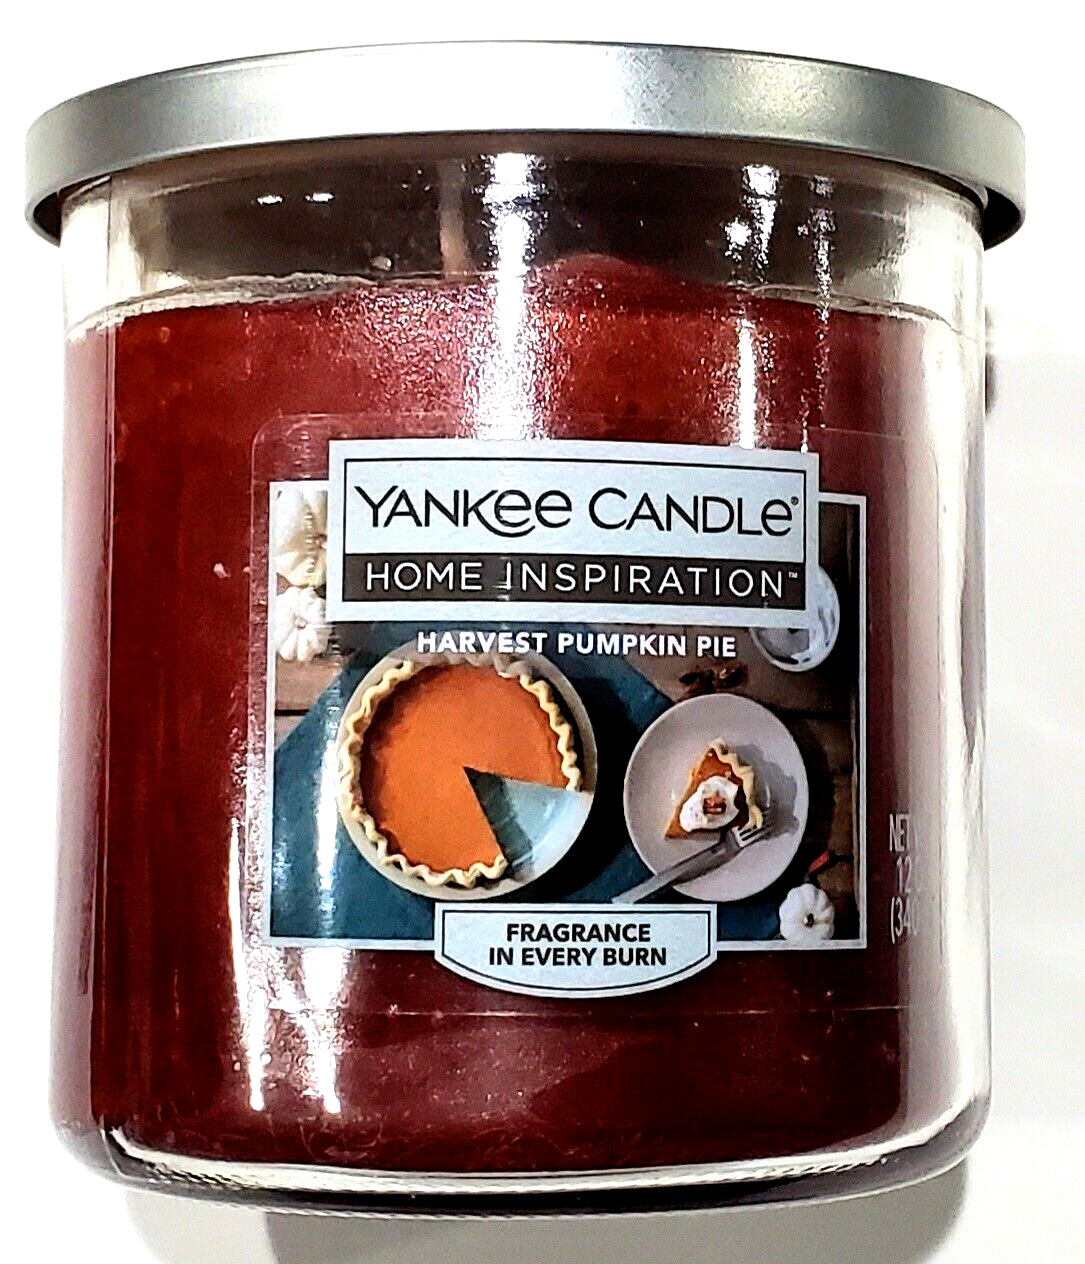 Primary image for Yankee Candle Home Inspiration Harvest Pumpkin Pie Fragrance Every Burn 12 Oz.